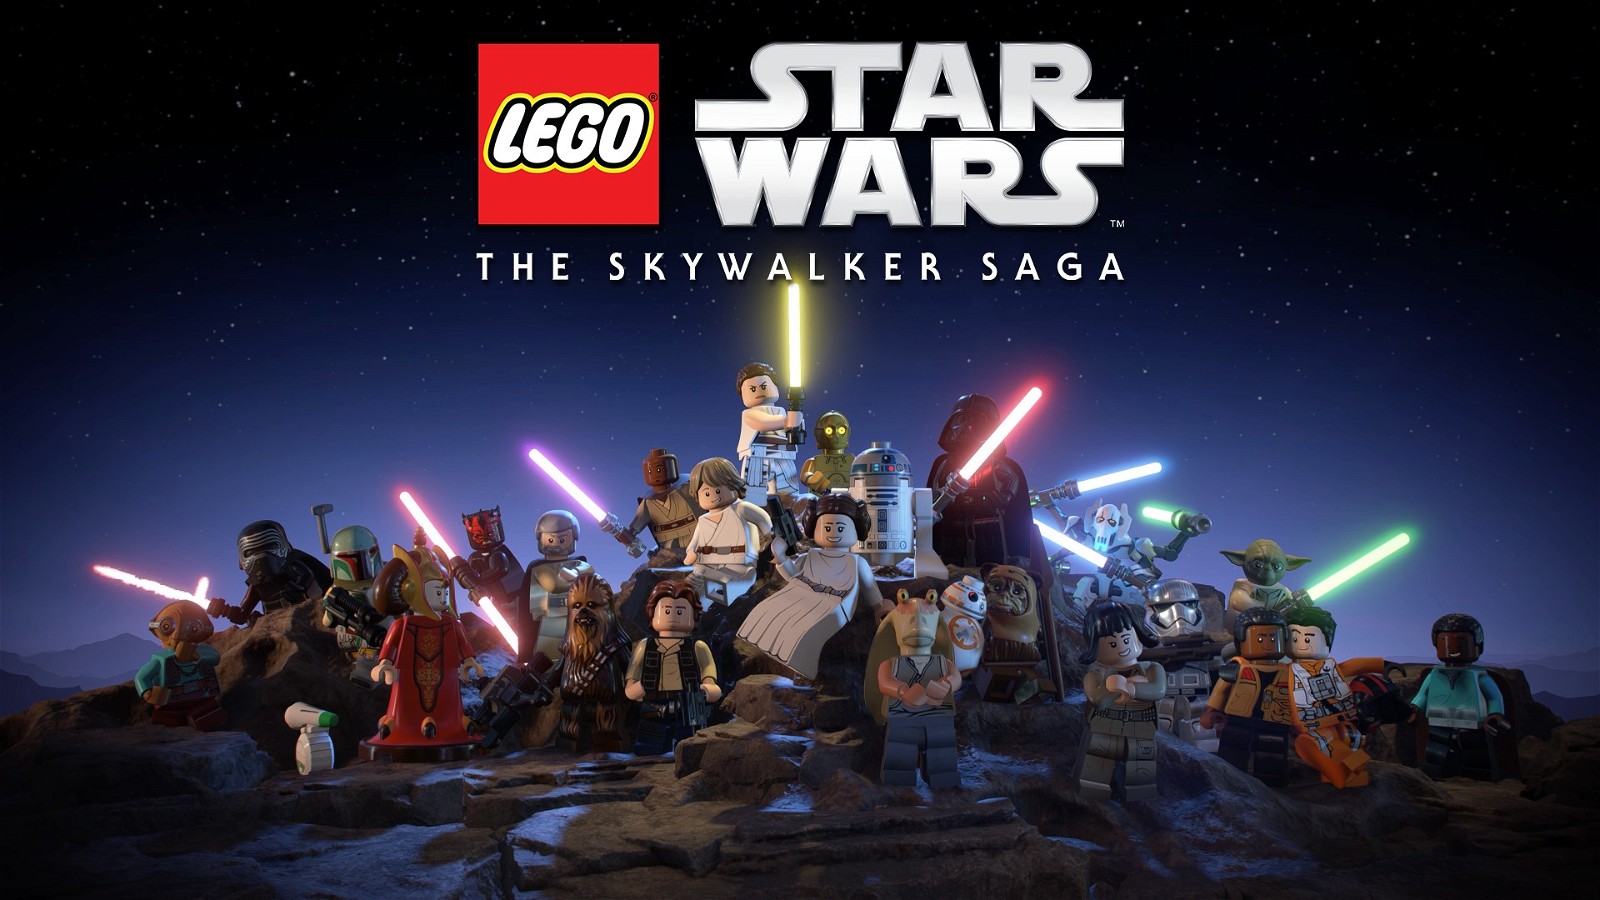 Awesome Display of Fan Interaction by the LEGO Star Wars: The Skywalker Saga Team